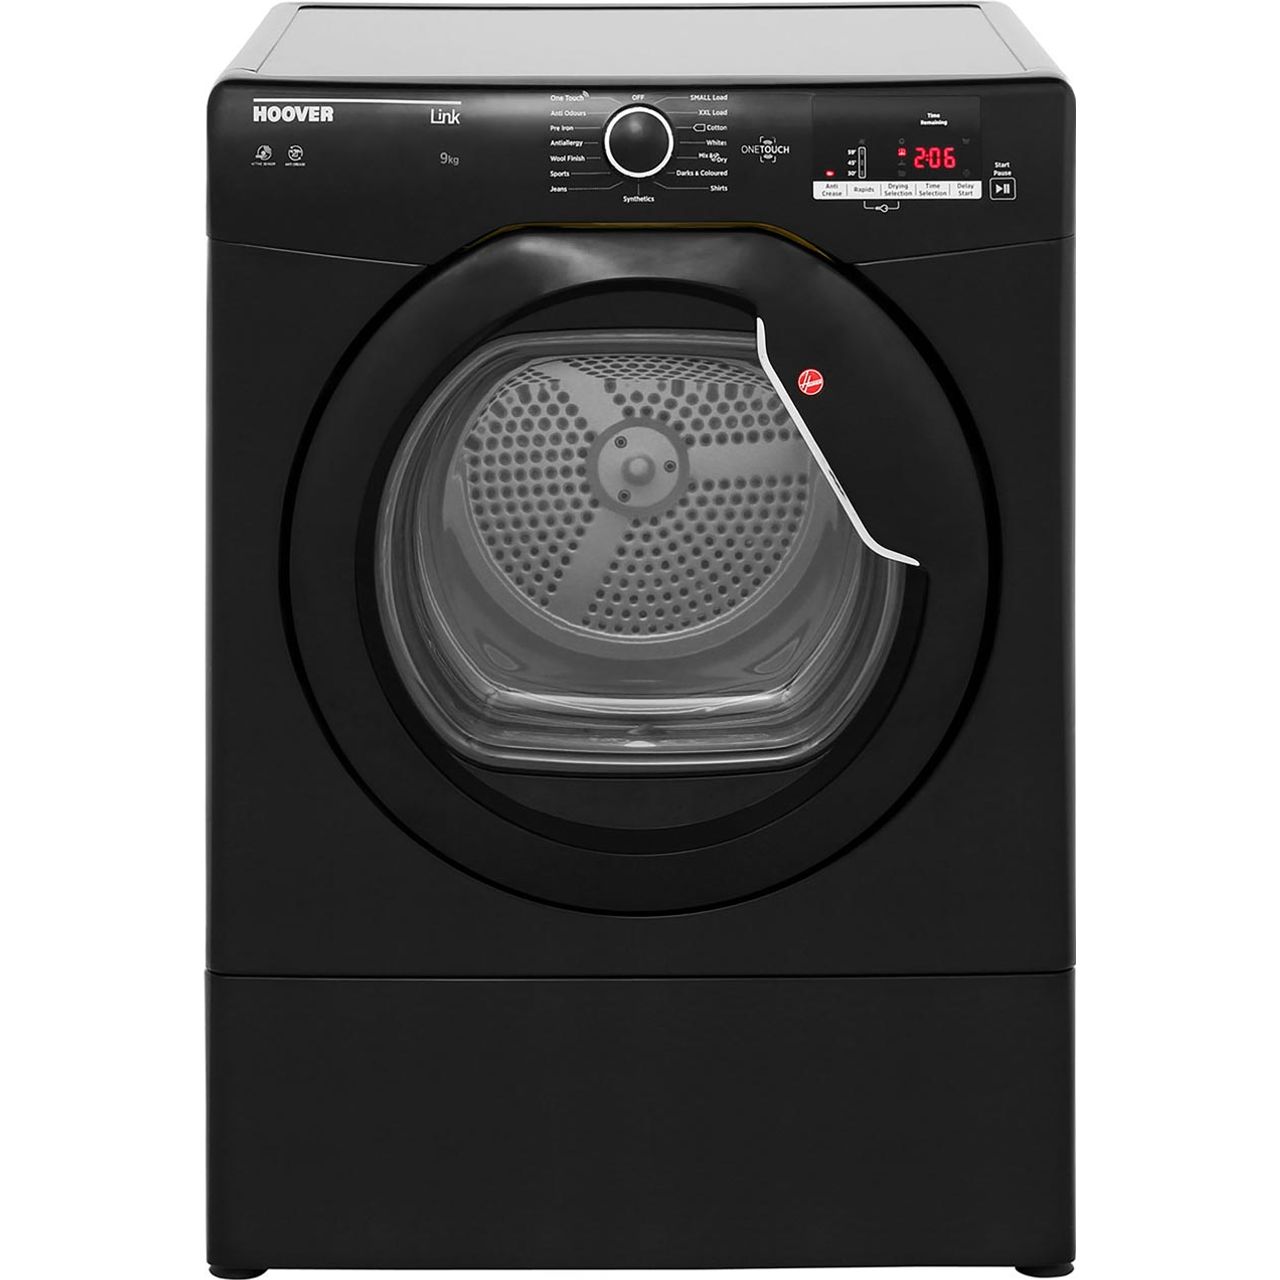 Hoover Link HLV9DGB 9Kg Vented Tumble Dryer Review